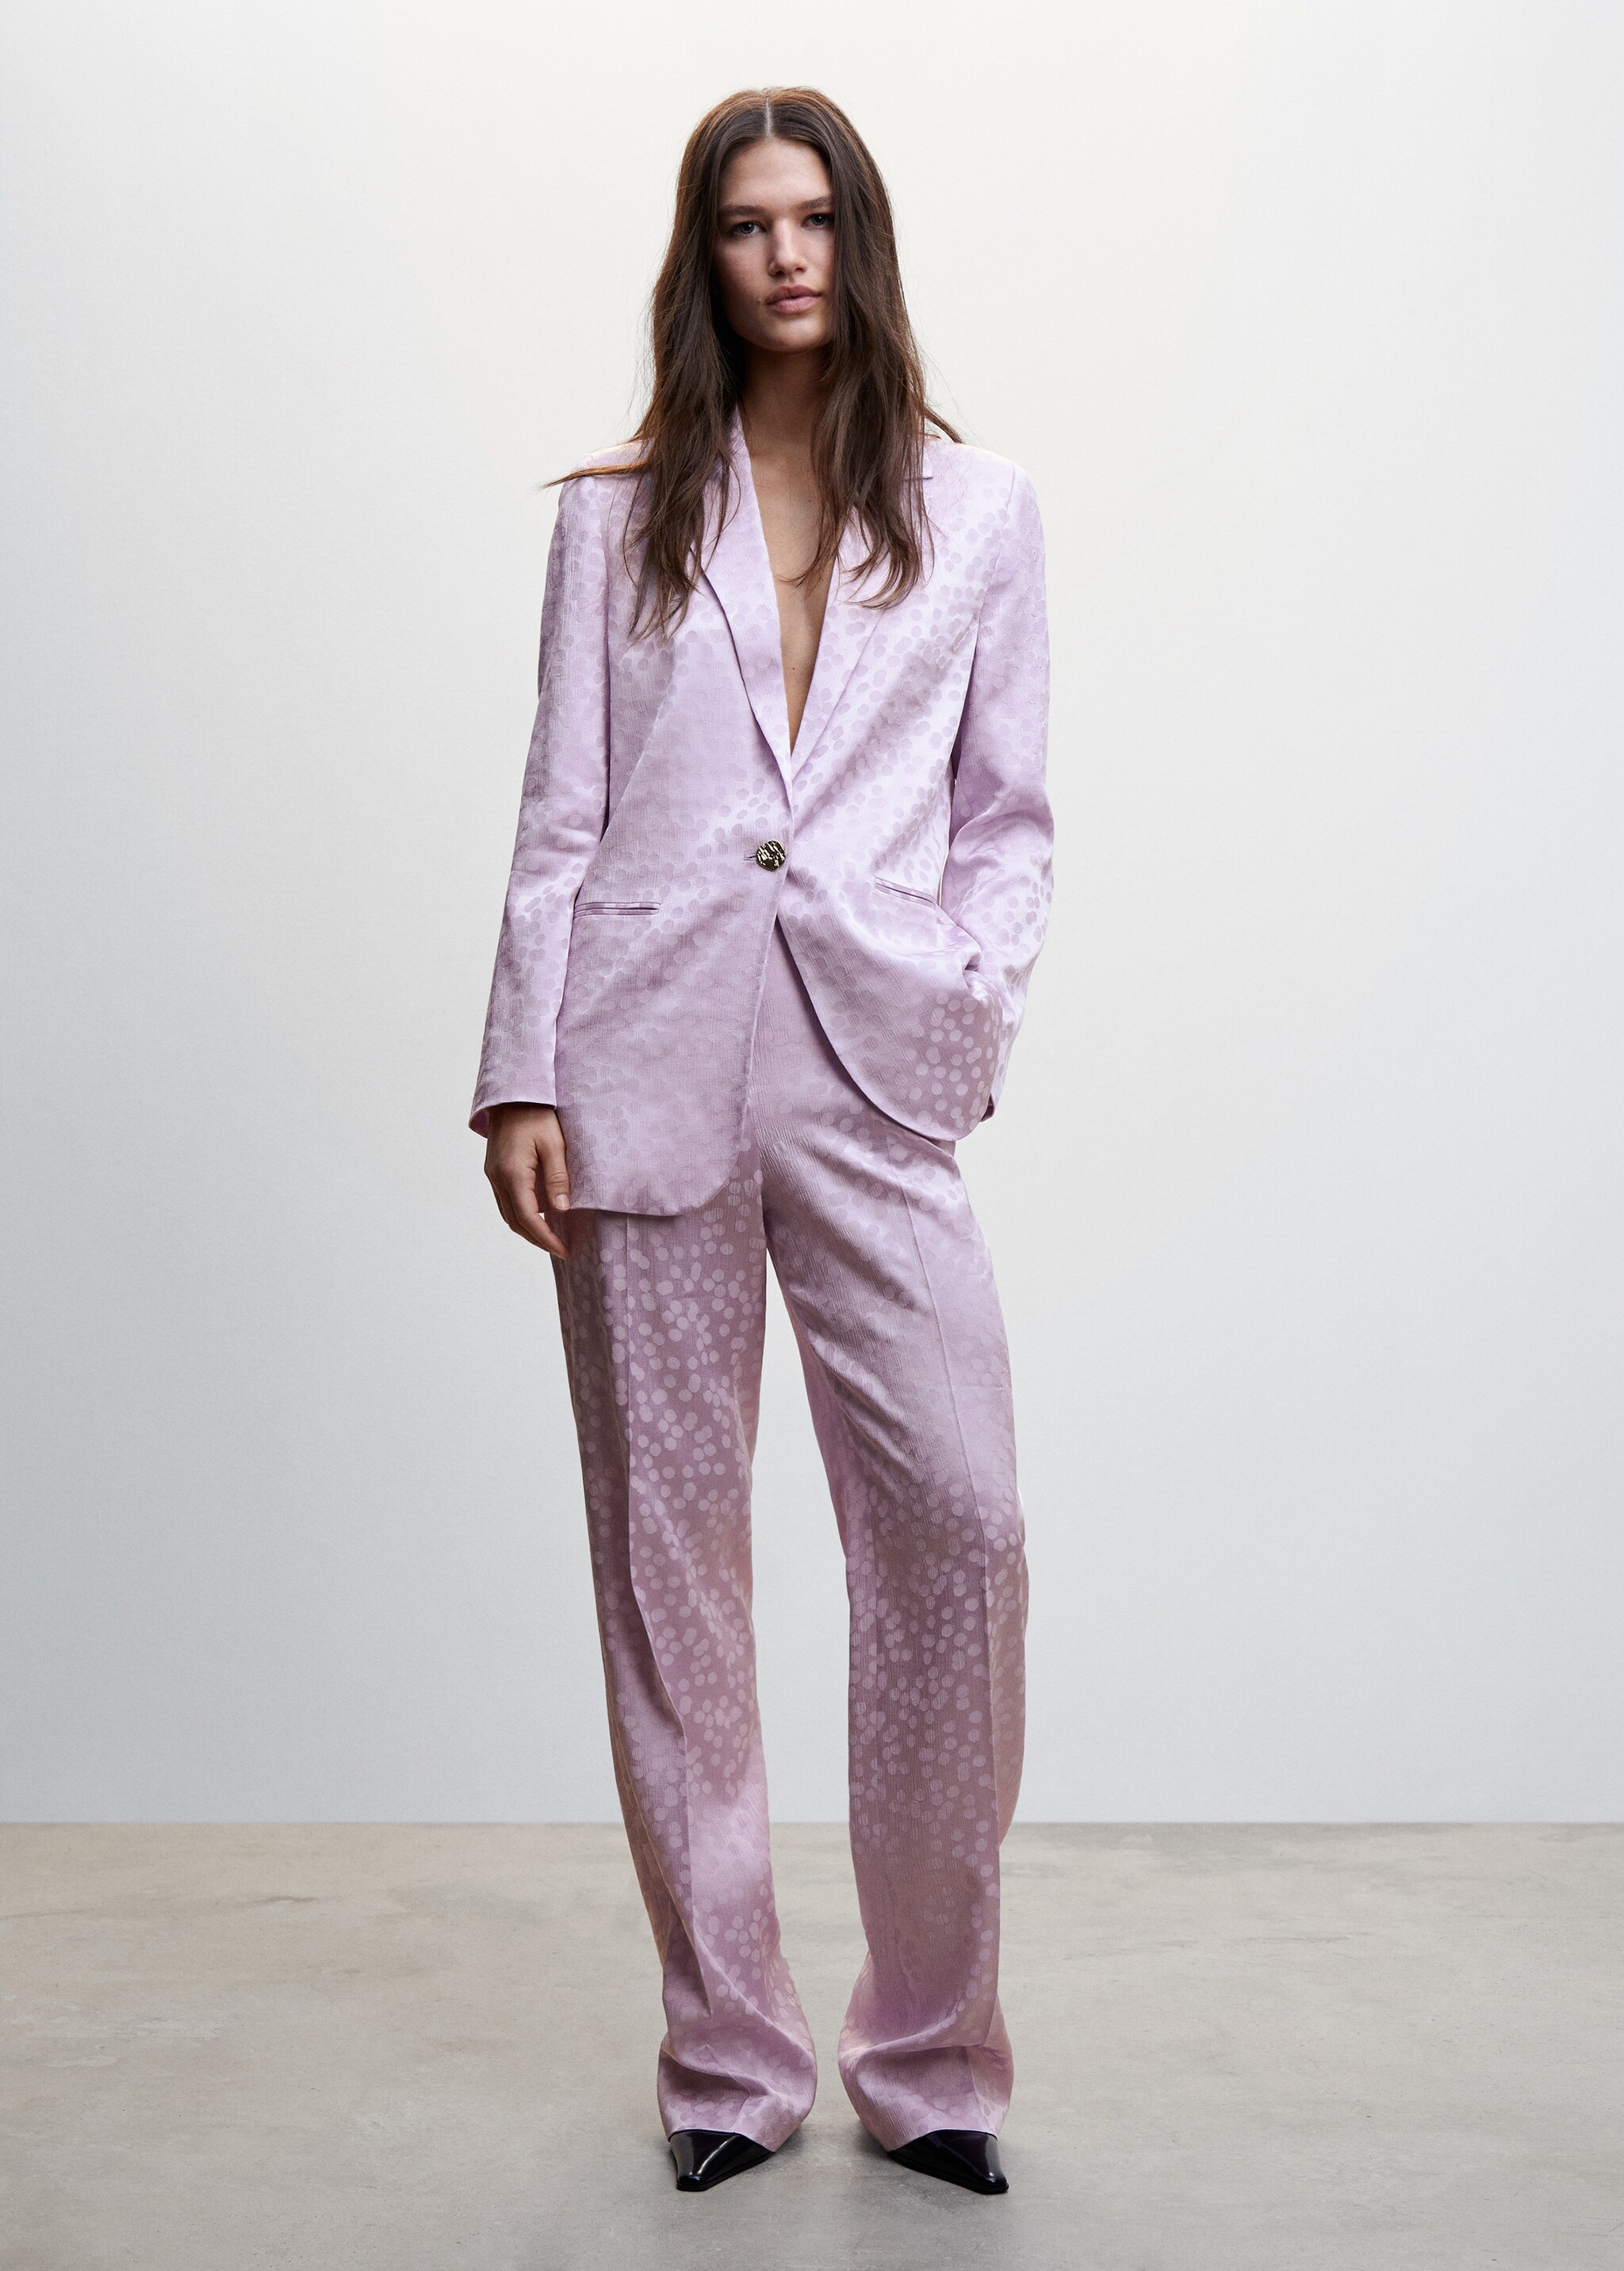 Satin trousers with polka dots - General plane